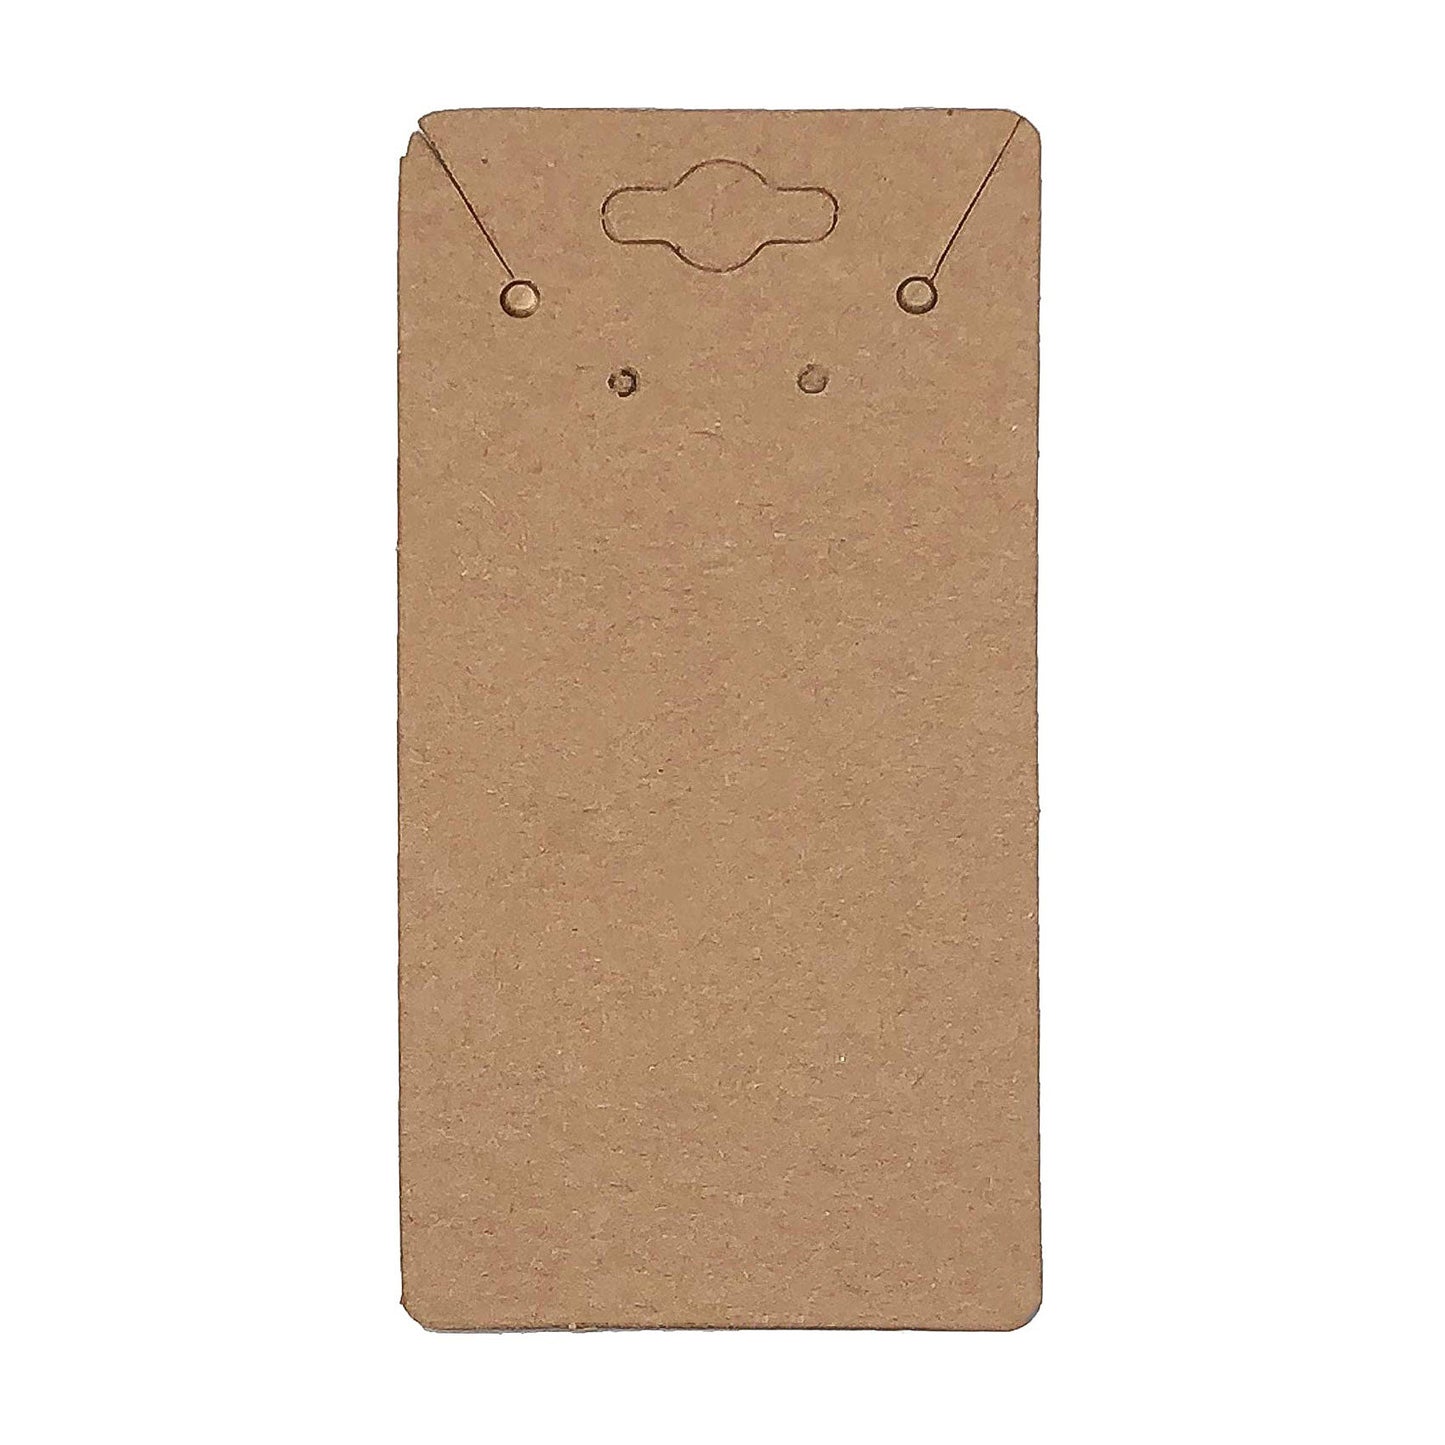 2" x 4" Kraft Paper Necklace and Earring Combo Card